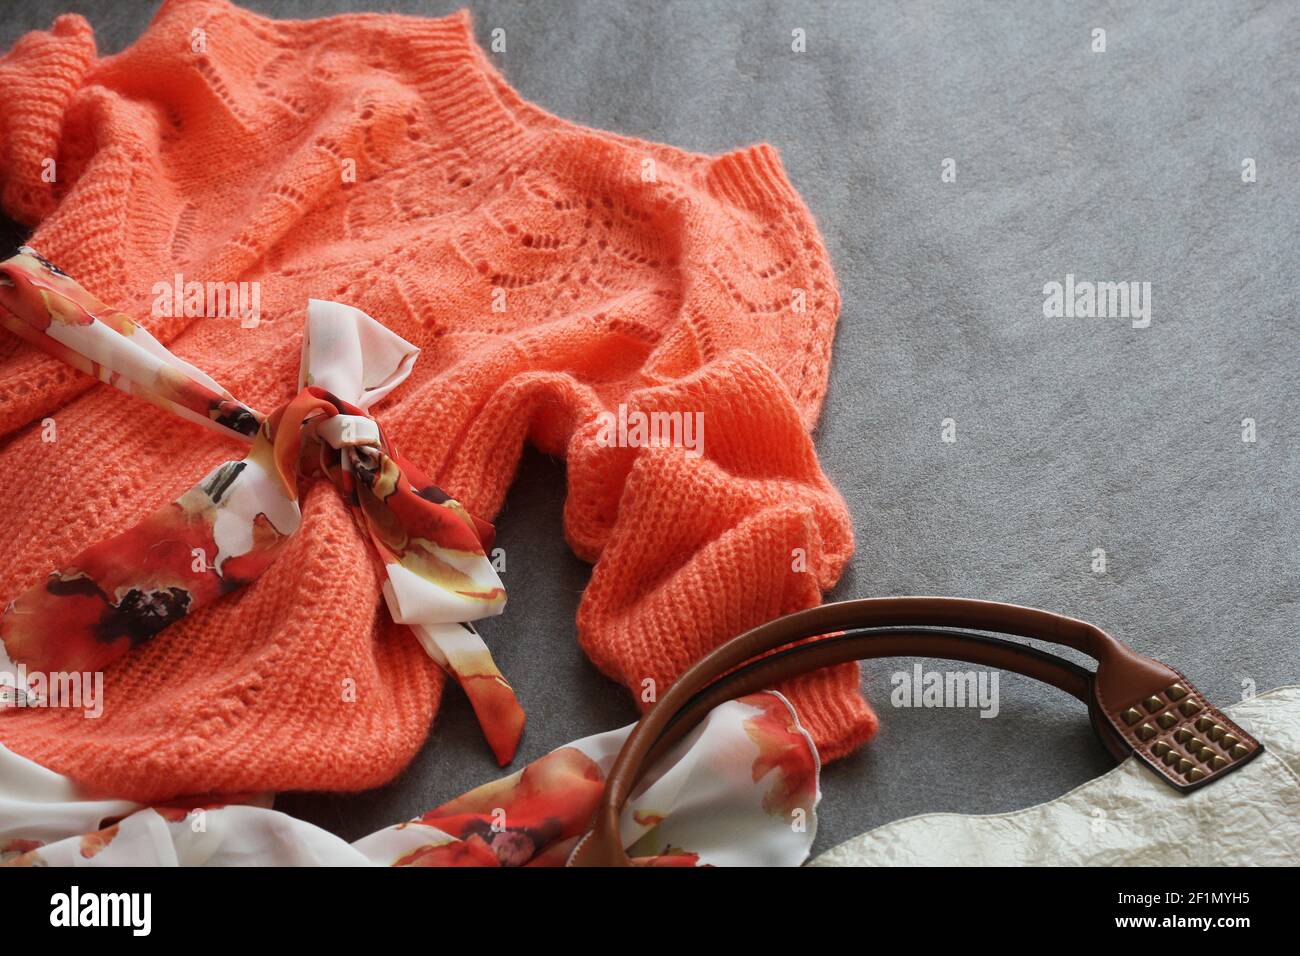 Flat Lay Shot Of Female Spring Clothing And Accessories. Pink Sweater, Ddress, Handbag On Grey Backgound . Stock Photo